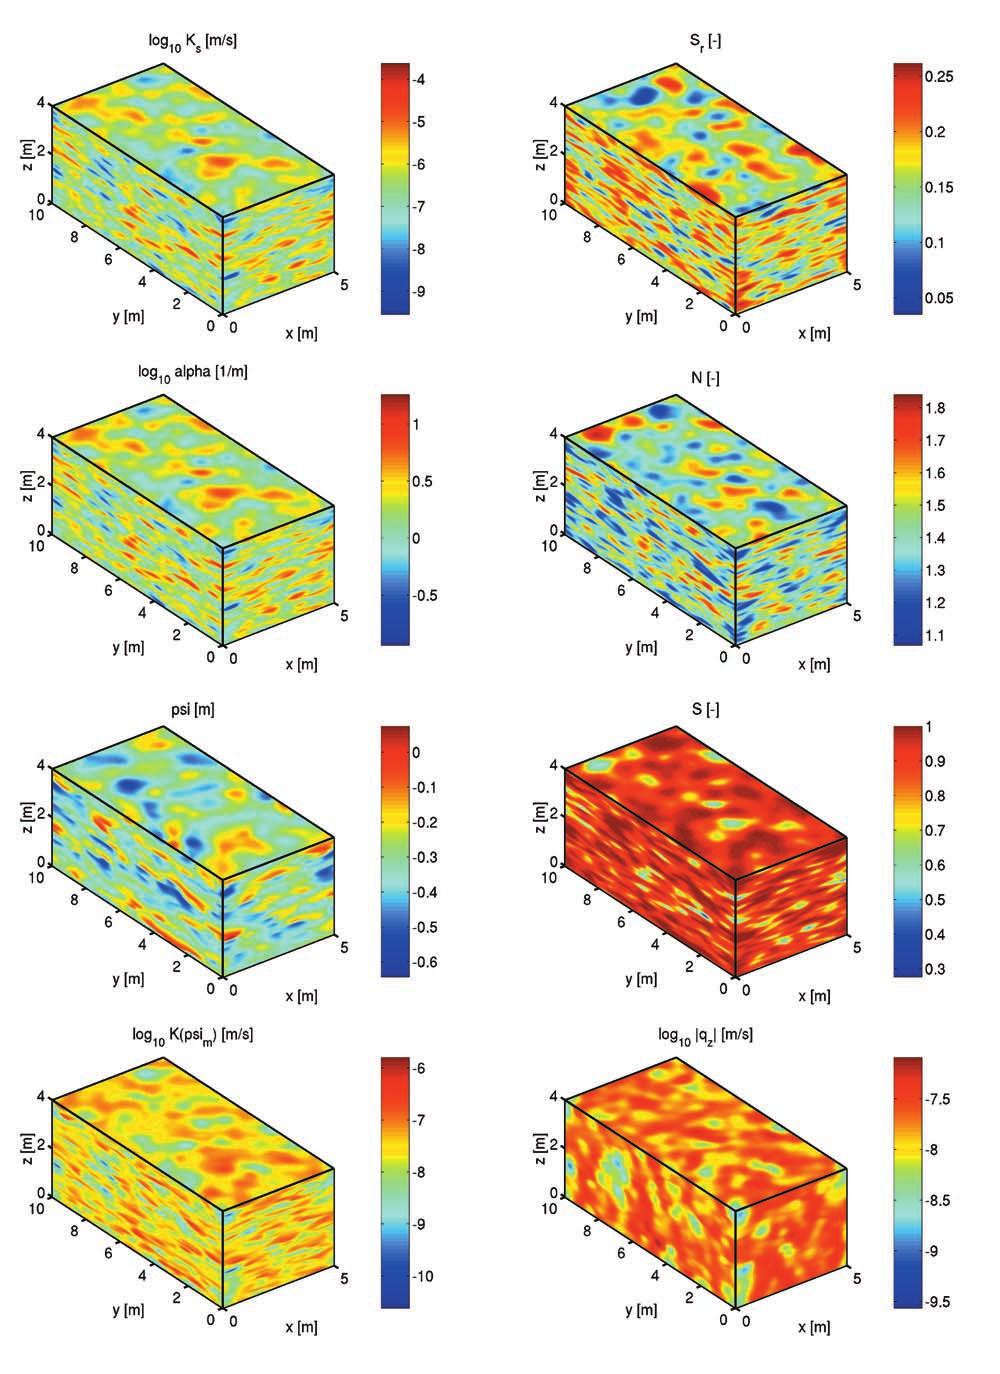 CIRPKA AND KITANIDIS: DISPERSION AND DILUTION IN UNSATURATED HETEROGENEOUS MEDIA Figure 1.